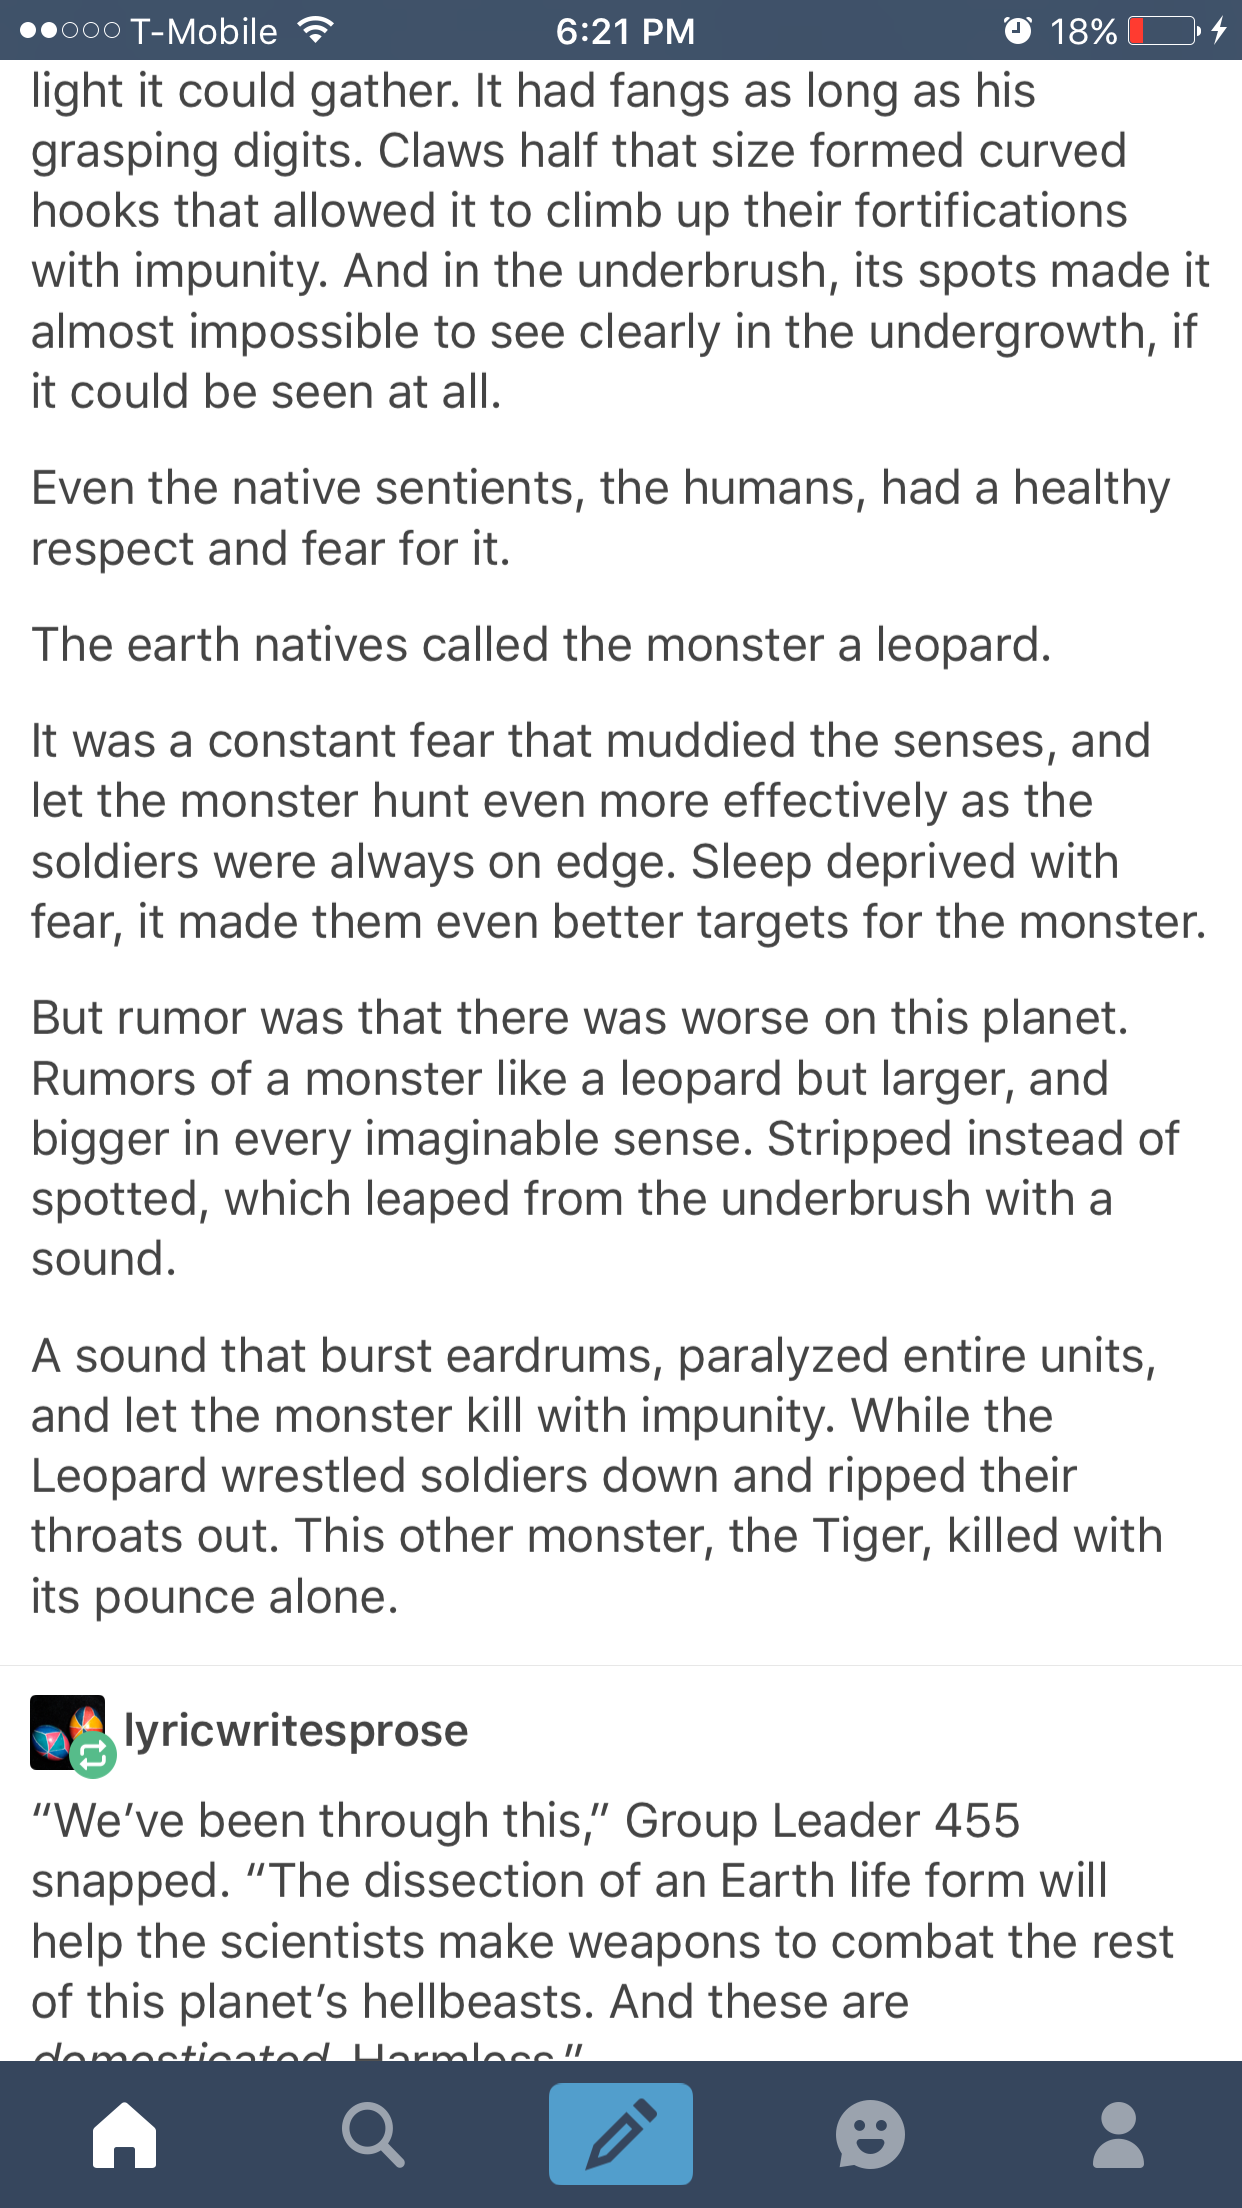 tumblr - screenshot - .000 TMobile @ 18% 04 light it could gather. It had fangs as long as his grasping digits. Claws half that size formed curved hooks that allowed it to climb up their fortifications with impunity. And in the underbrush, its spots made 